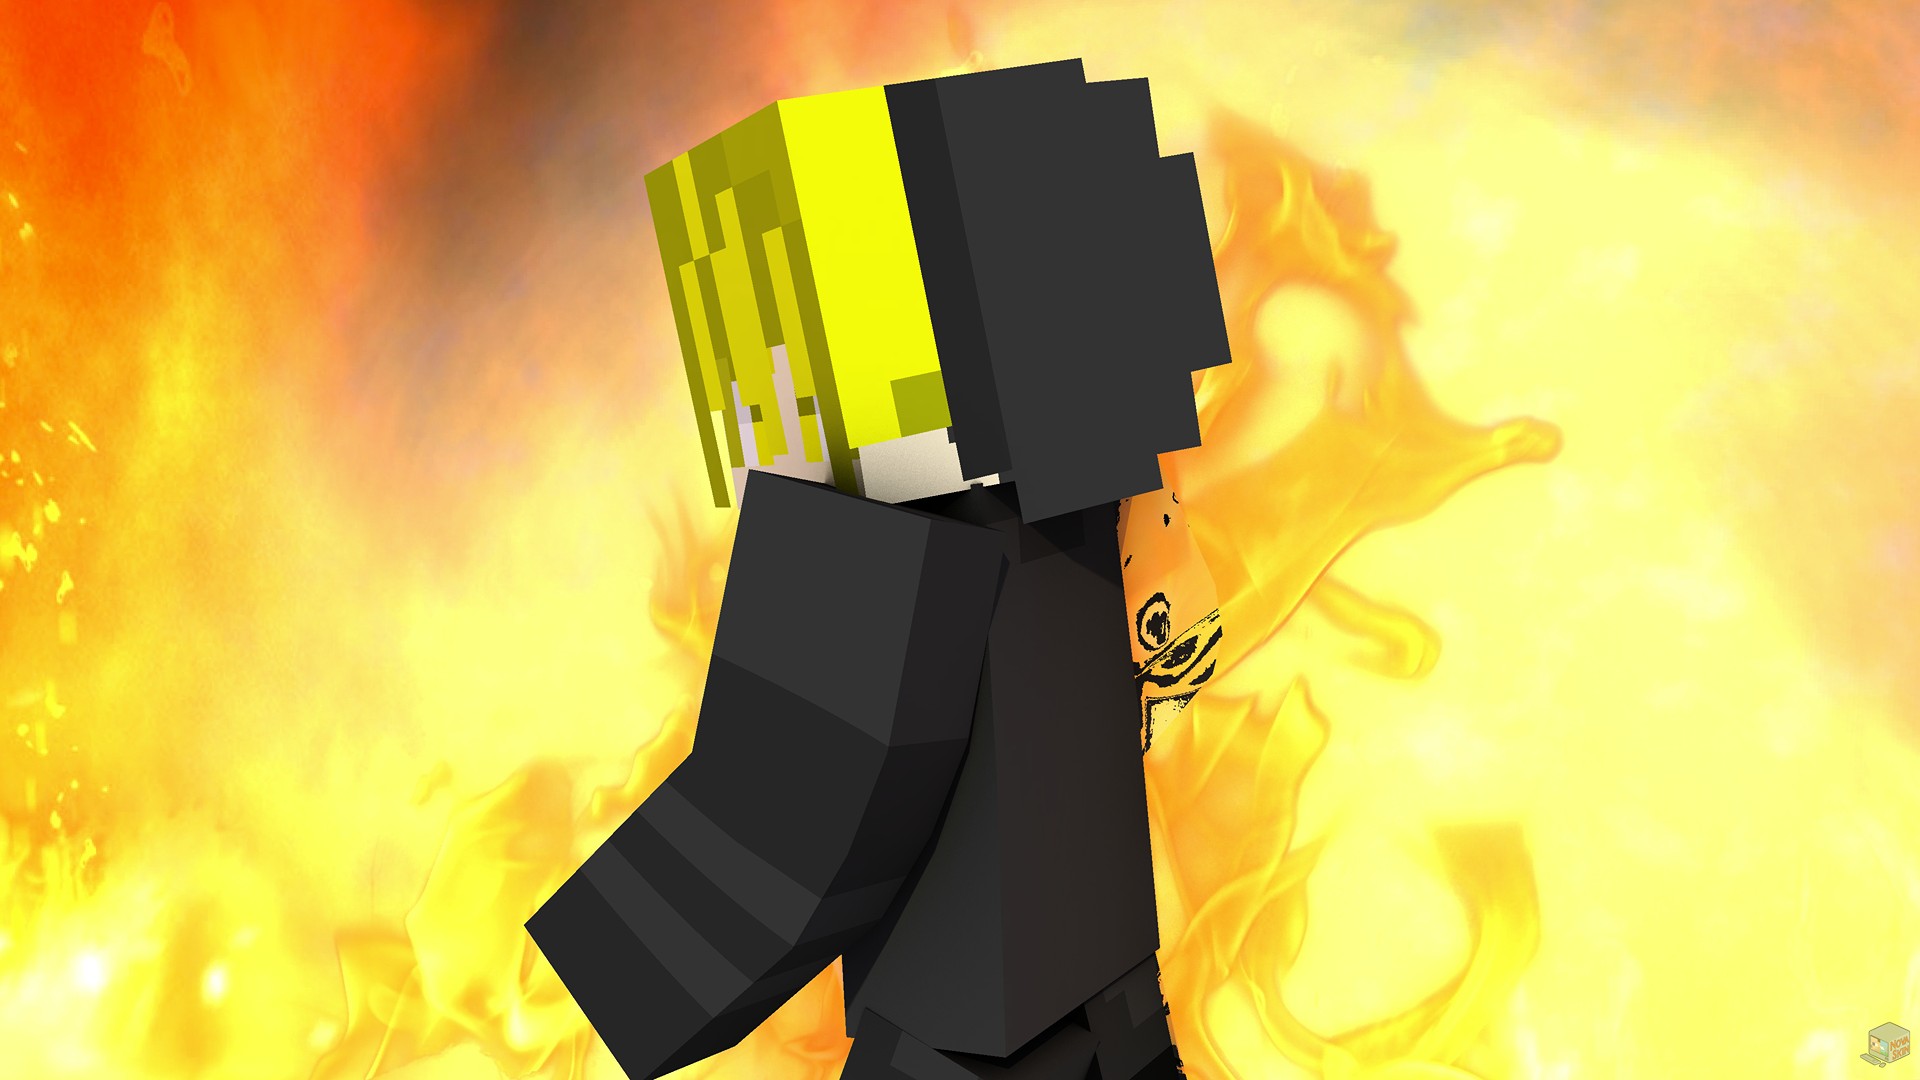 crazygames12's Profile Picture on PvPRP